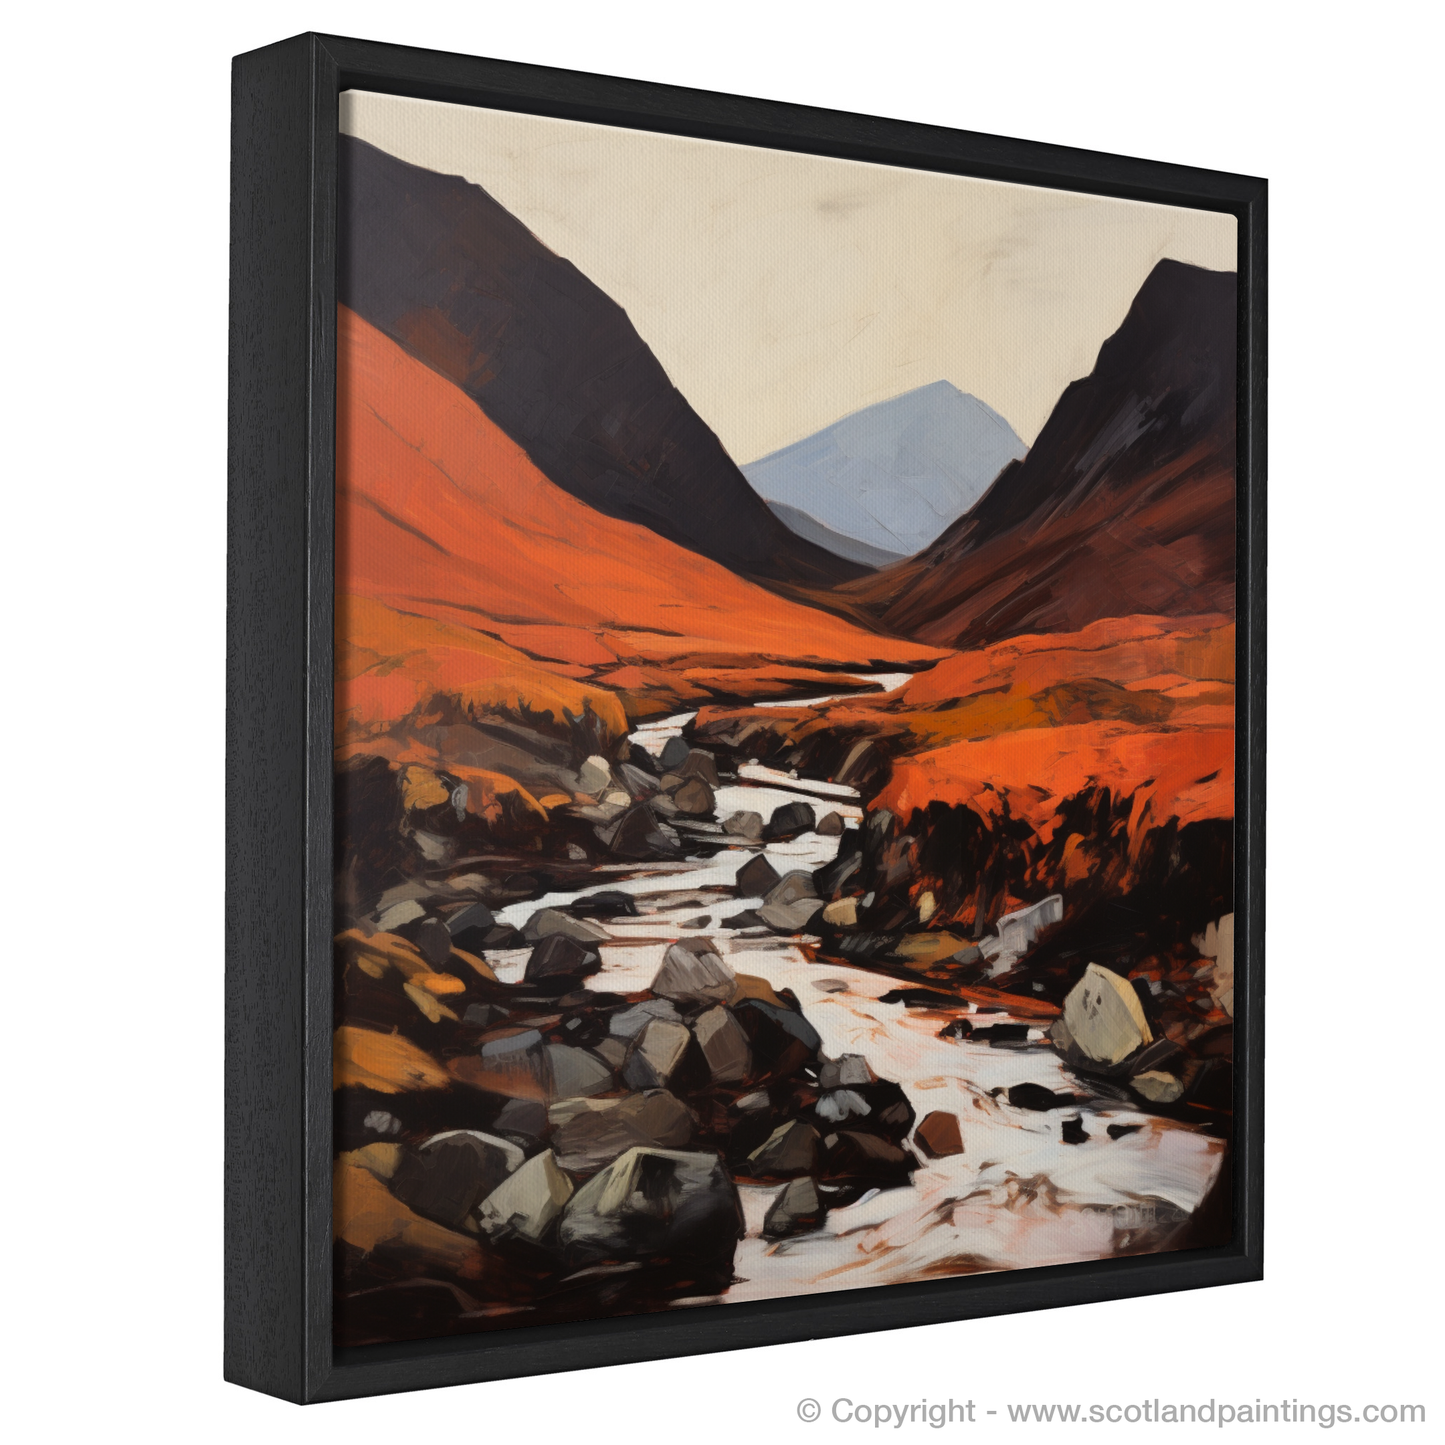 Painting and Art Print of Glen Rosa, Isle of Arran entitled "Fiery Embrace of Glen Rosa".